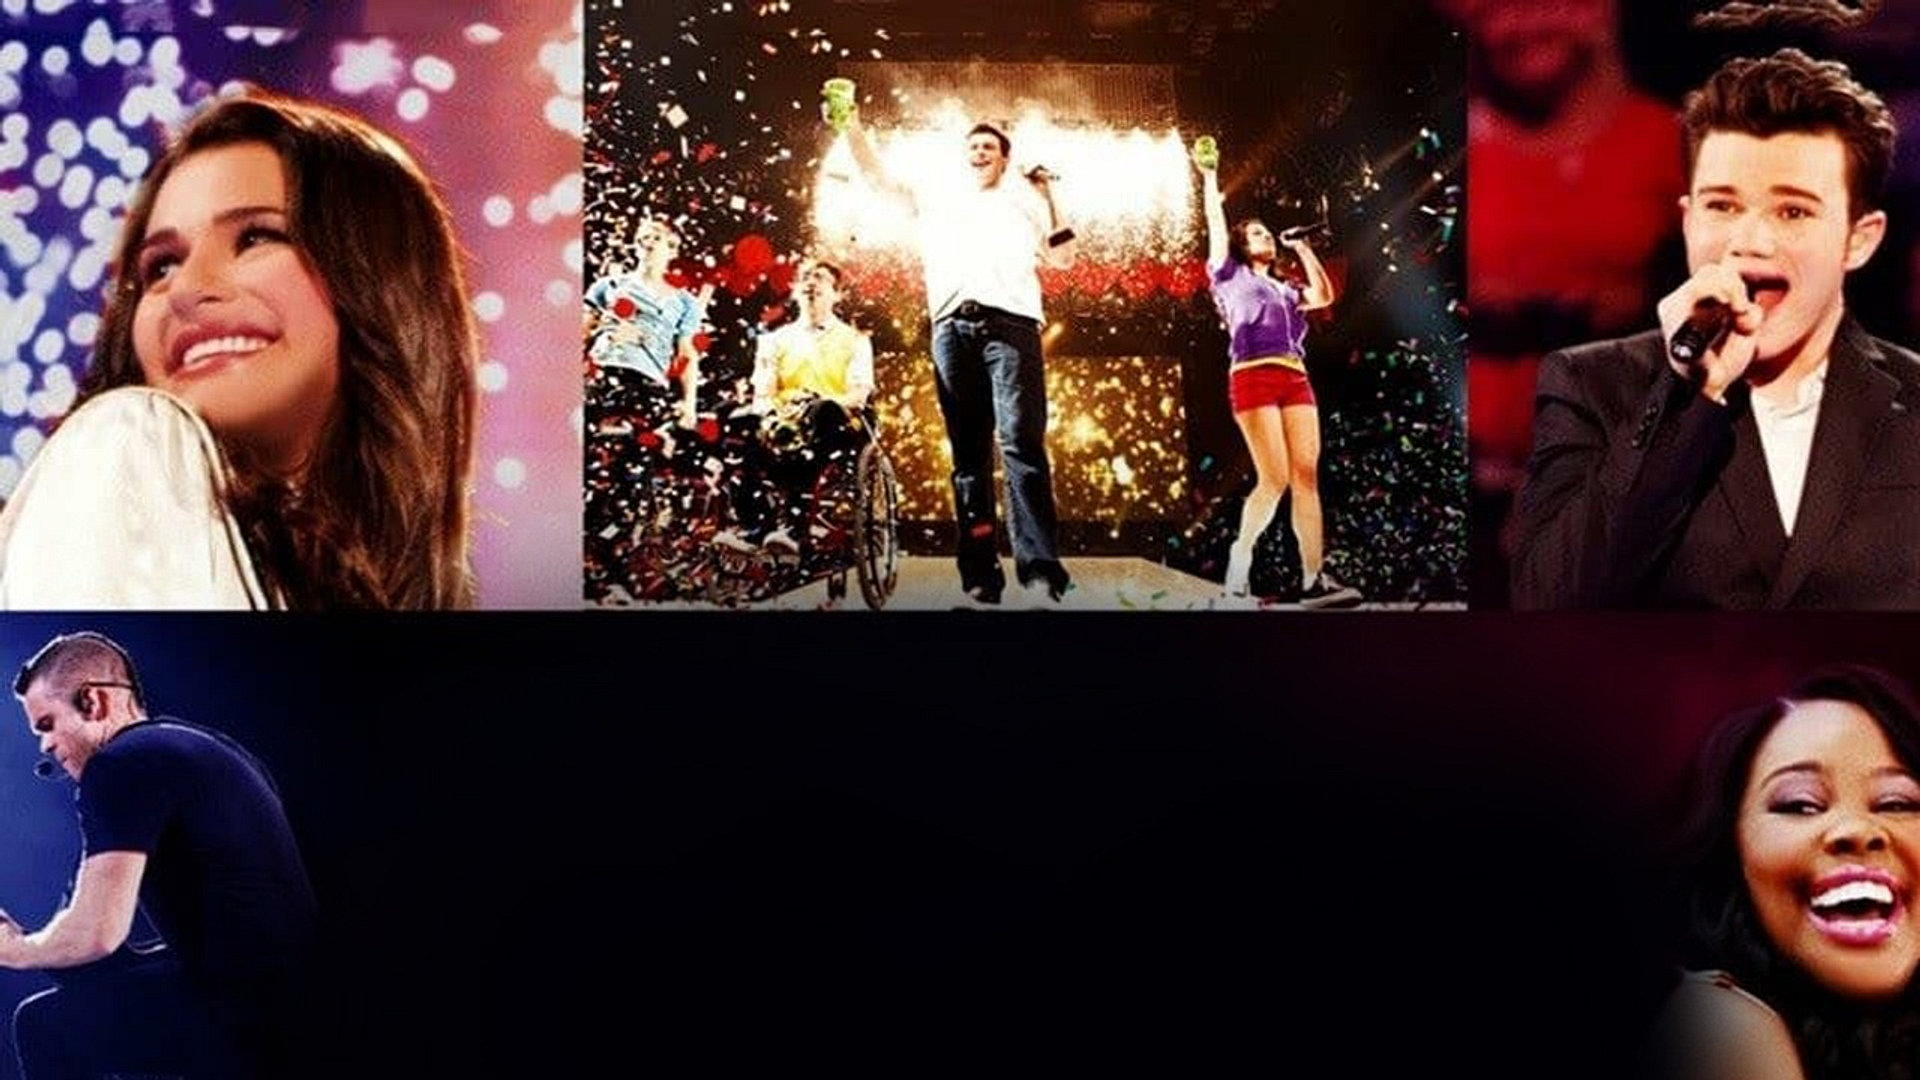 Glee: The Concert movie